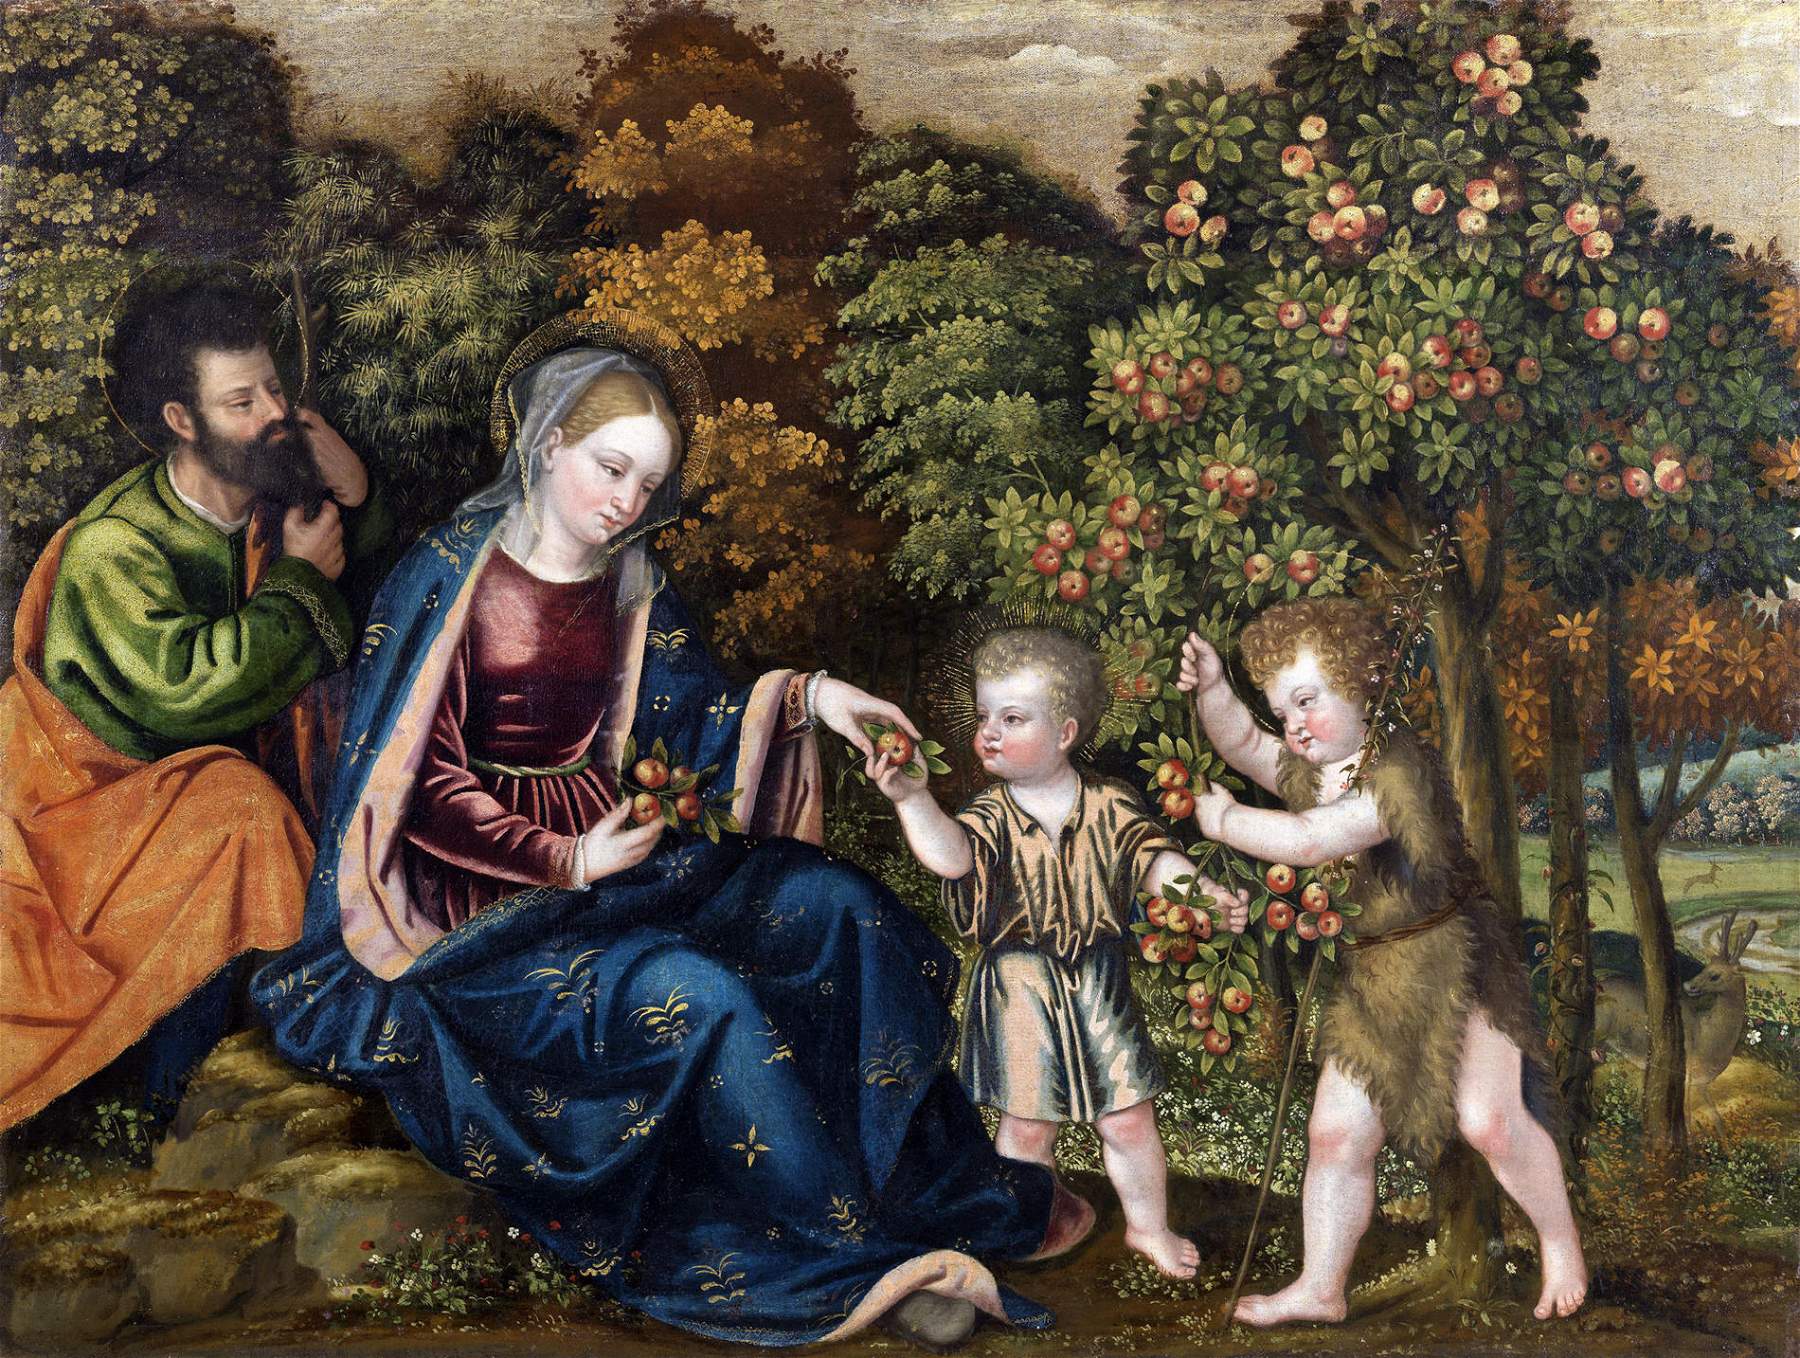 Female depiction in the sacred: an exhibition in Brescia with works from the late 16th century